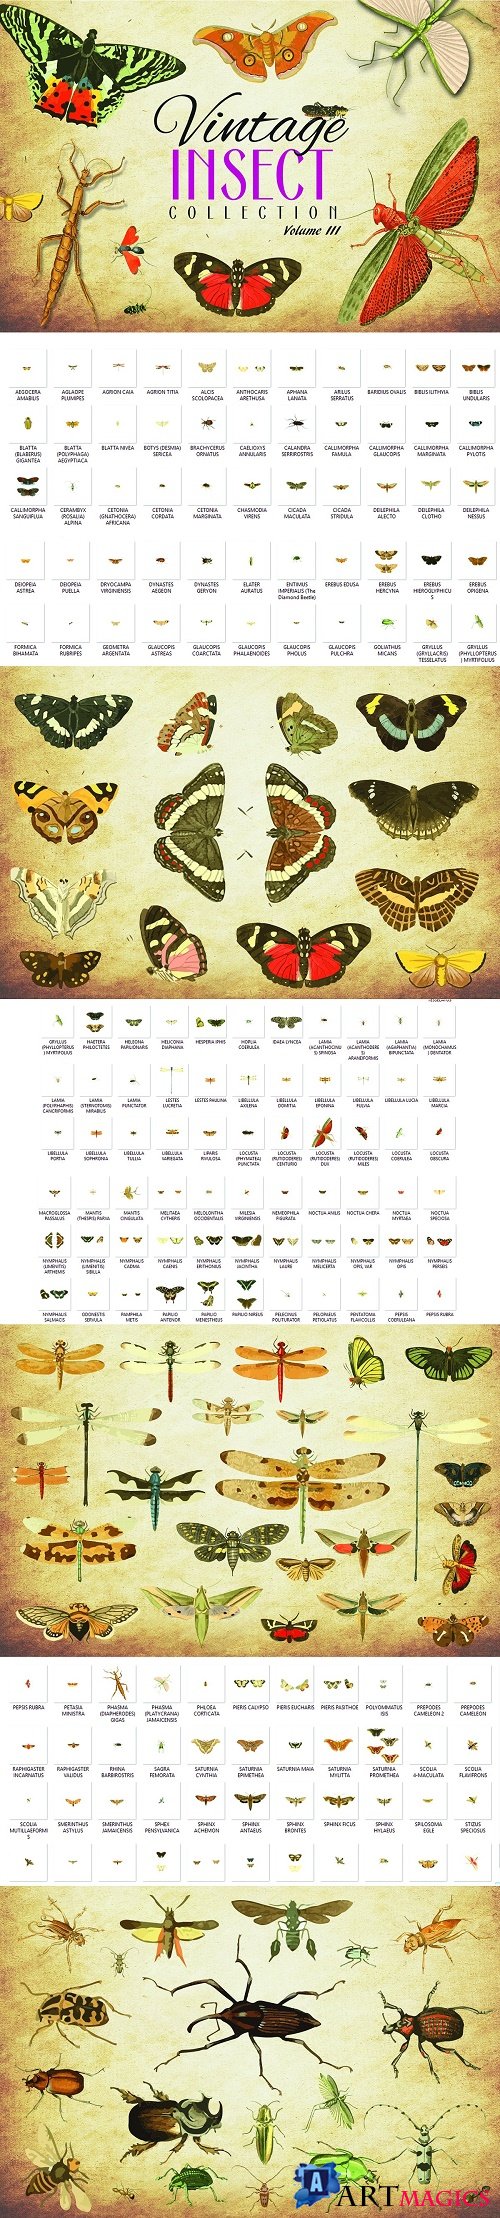 172 Vintage Insect Vector Graphics 3 - 3493784